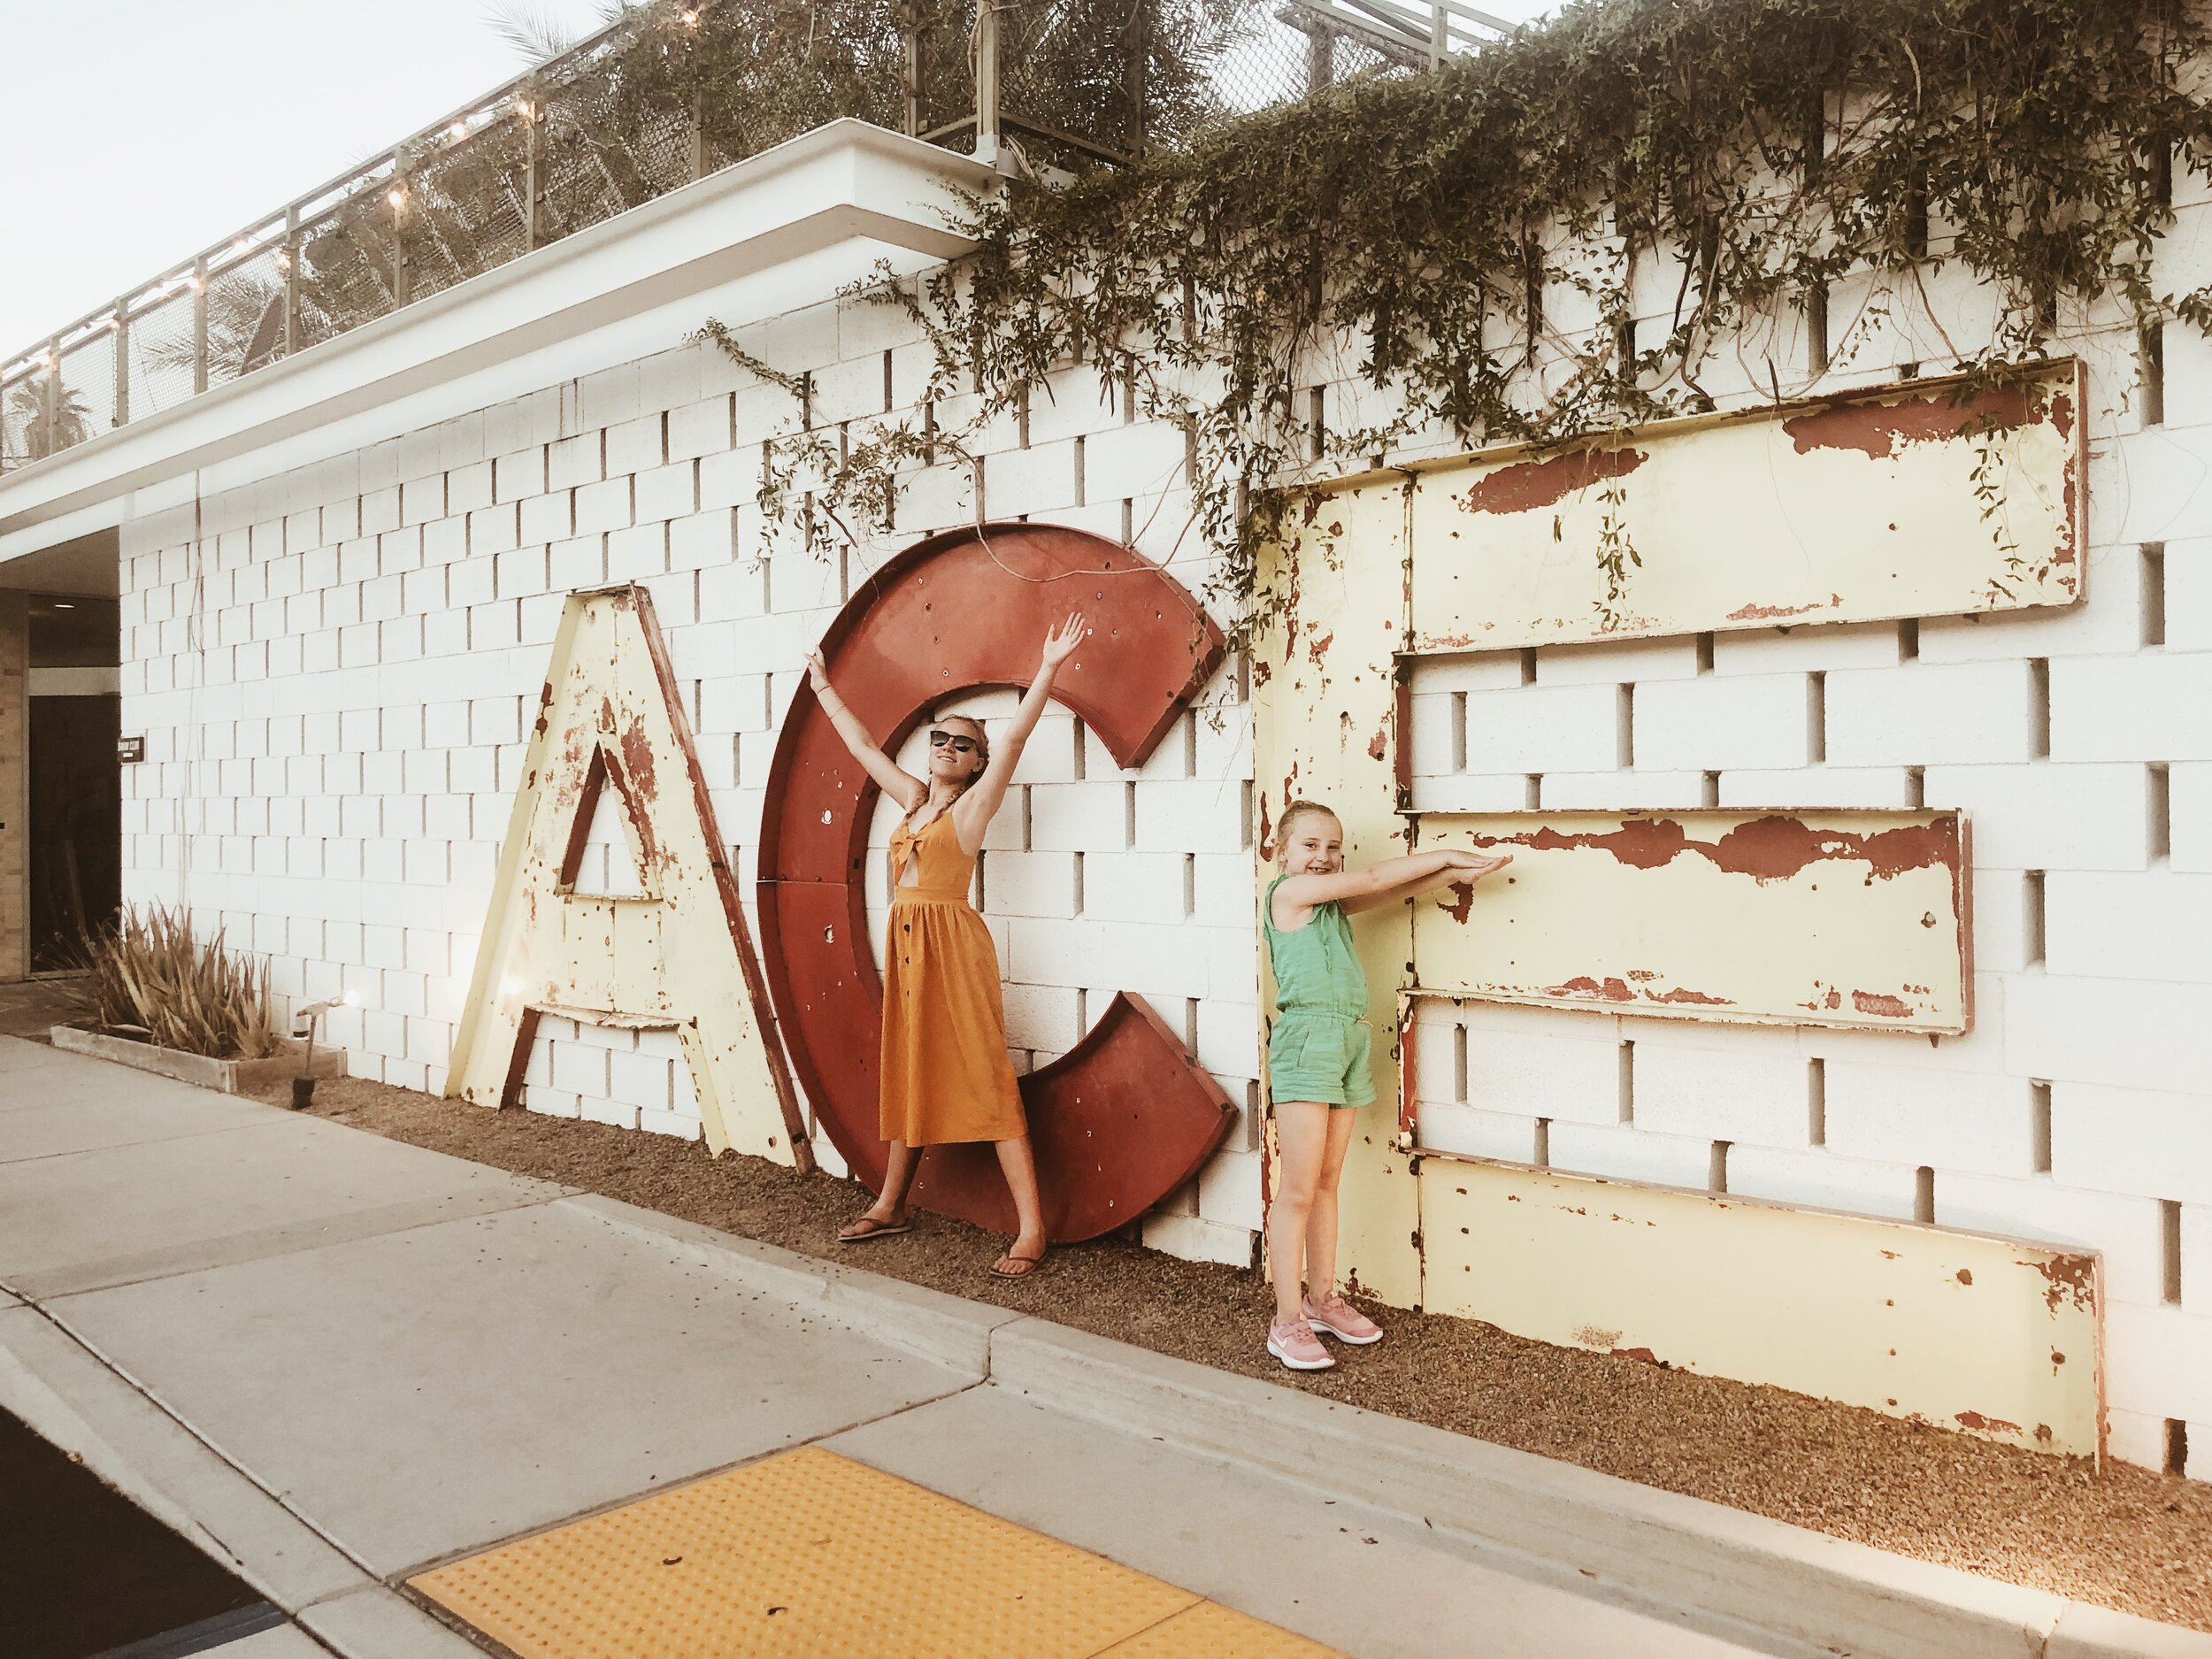 The Ace Hotel, Palm Springs